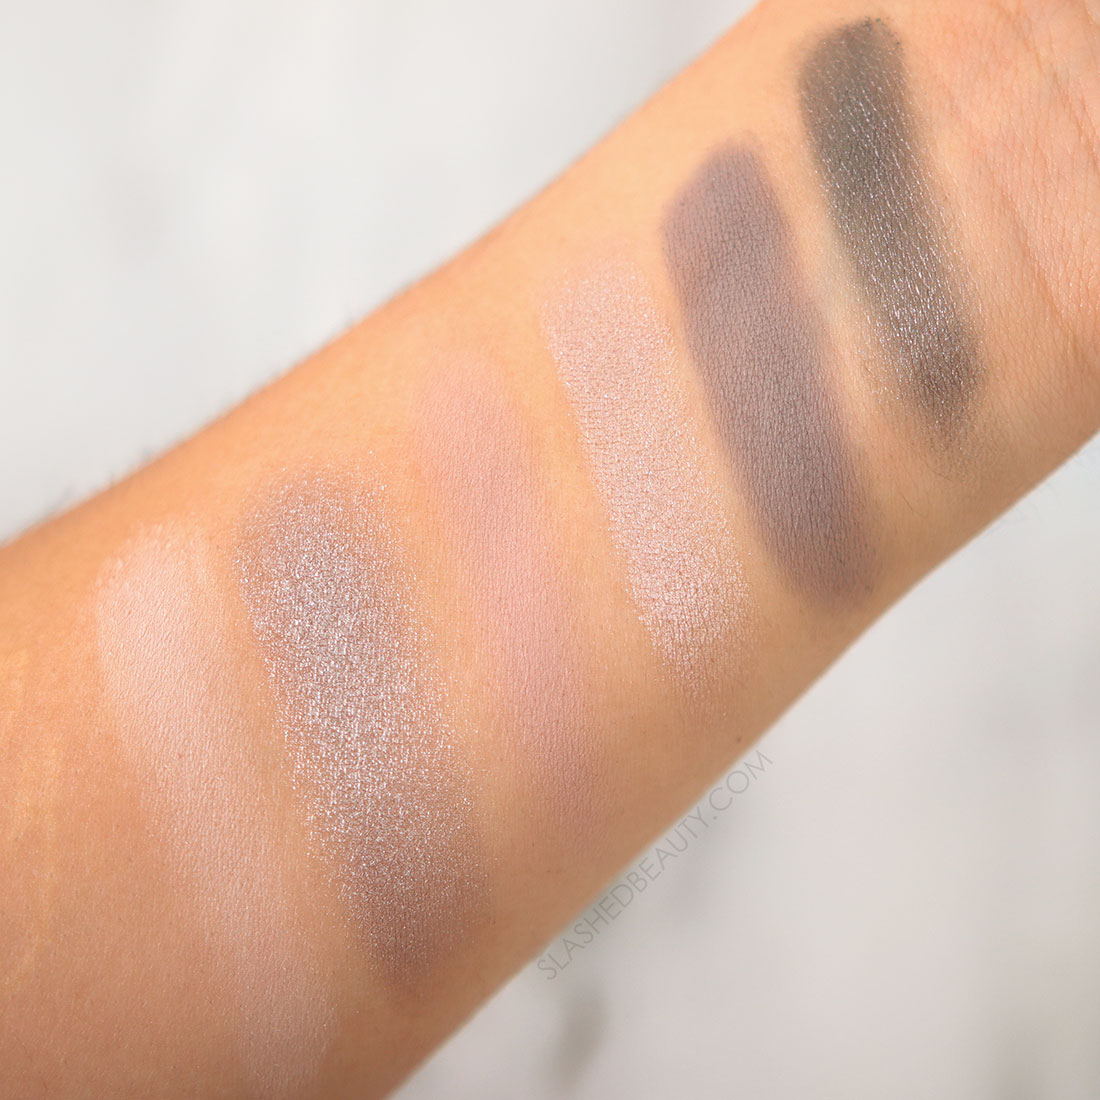 Swatches of essence Taupe It Up eyeshadow palette | essence Eyeshadow Palettes Swatches & Review | Slashed Beauty